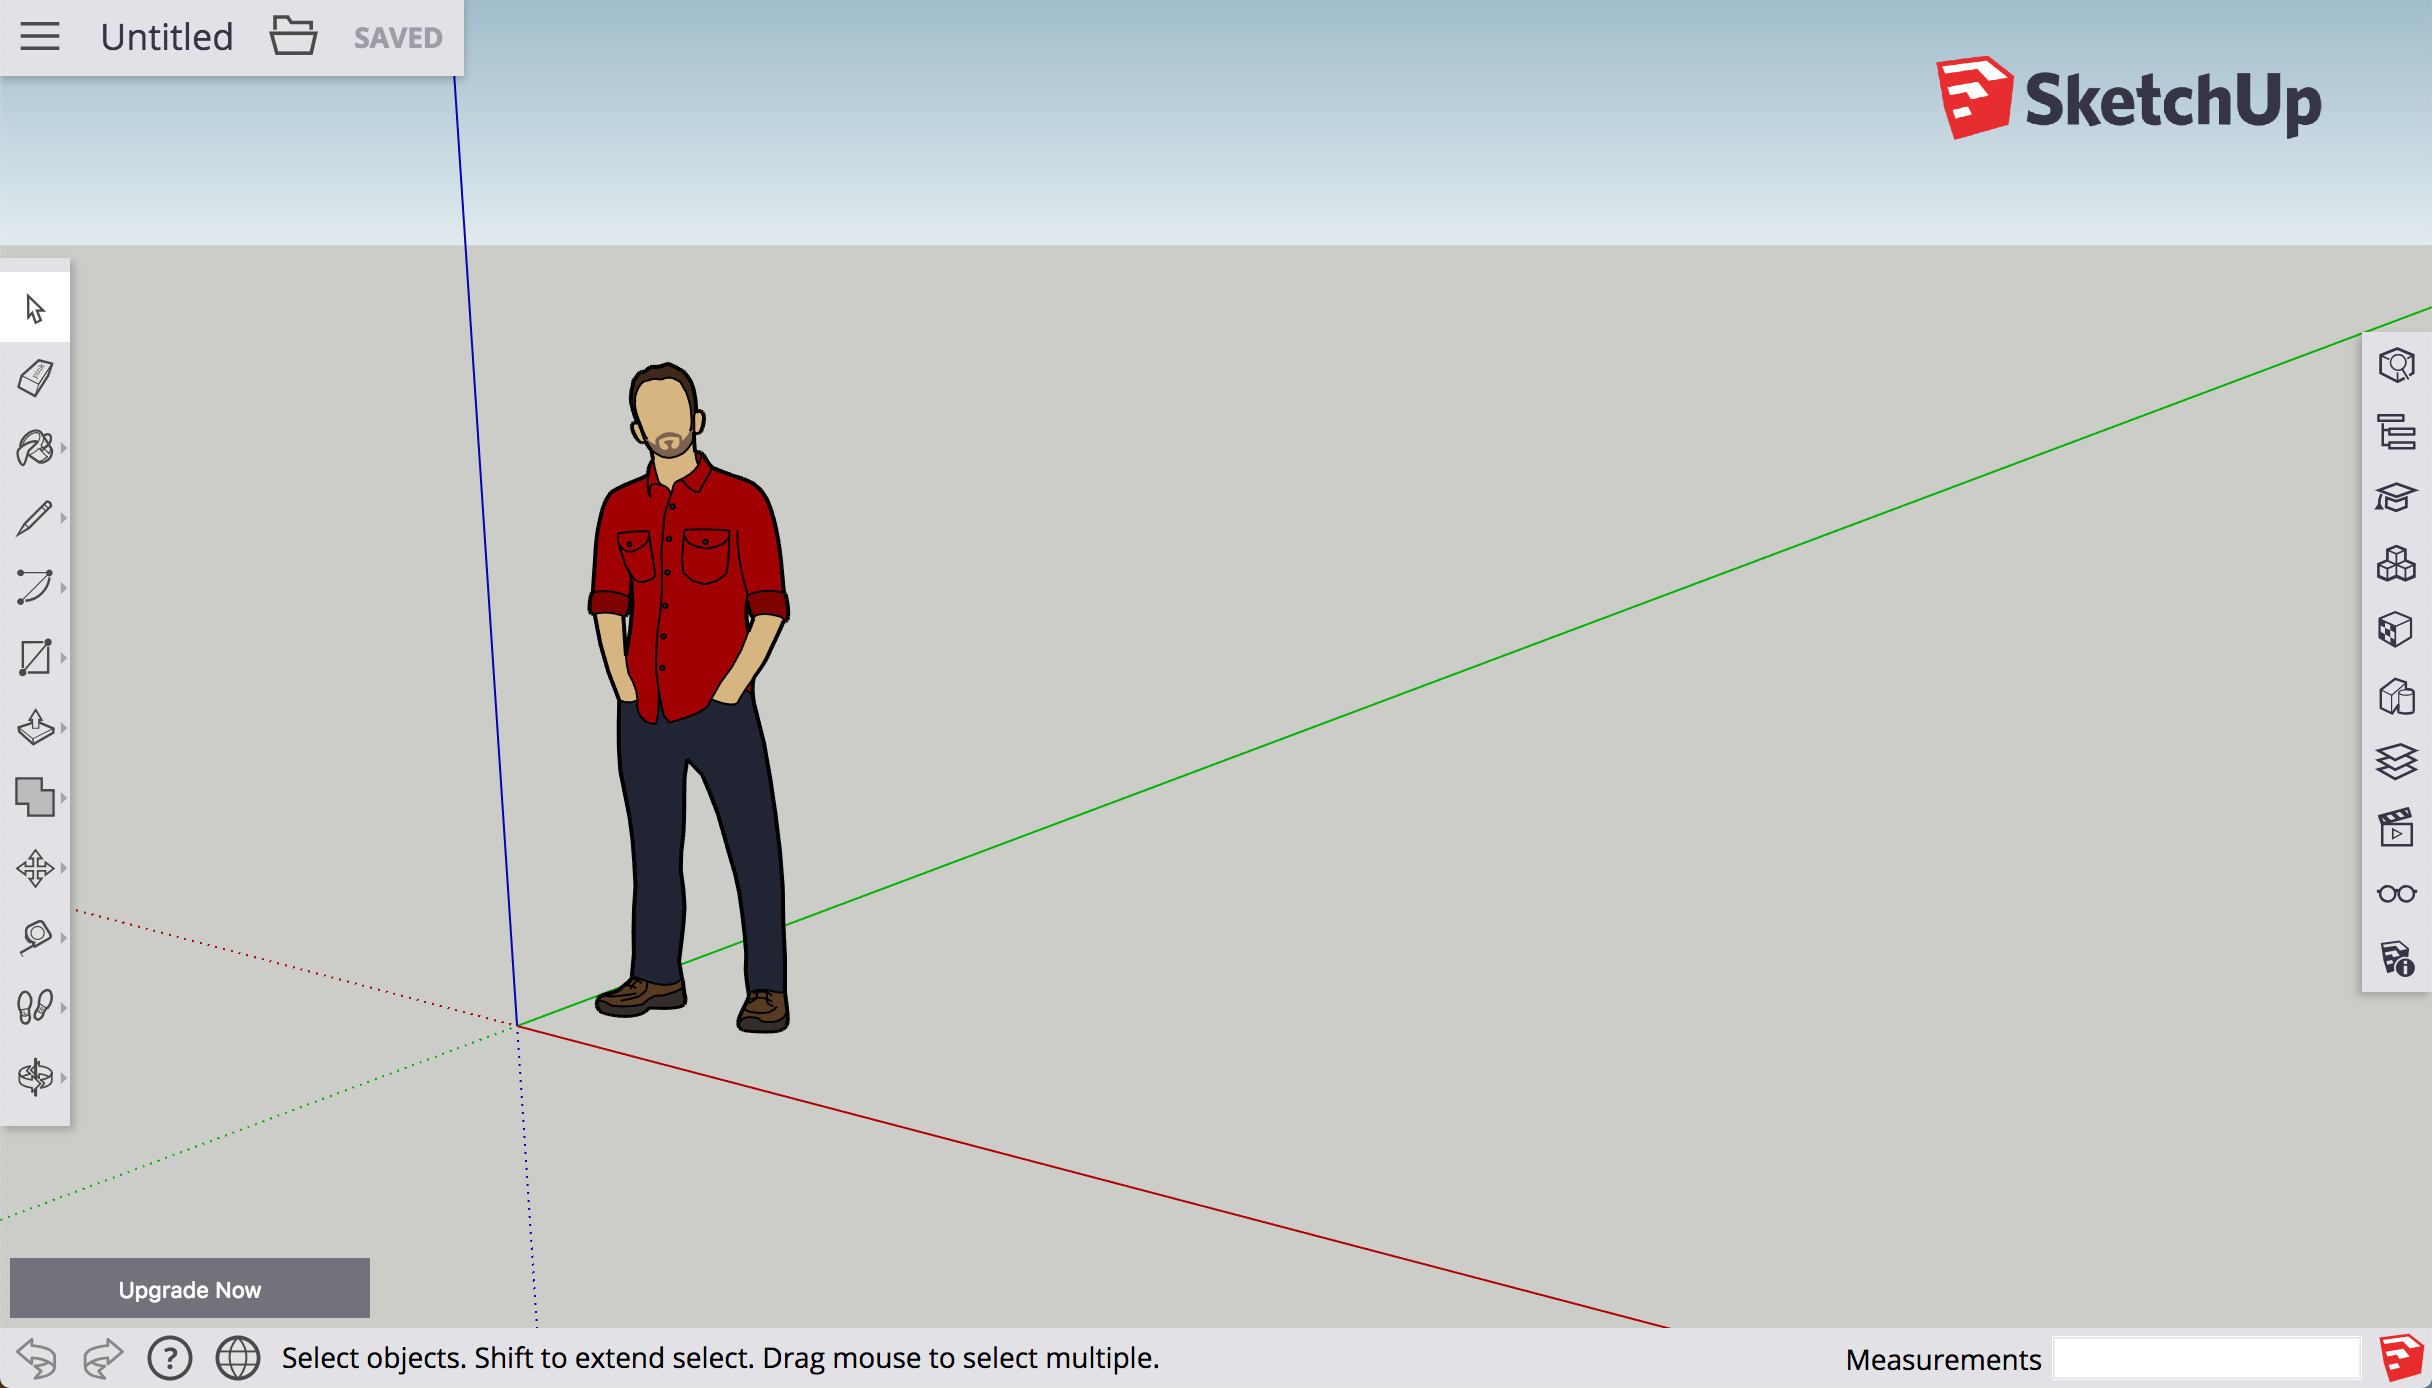 The SketchUp for Web interface offers drawing tools and features similar to SketchUp Pro